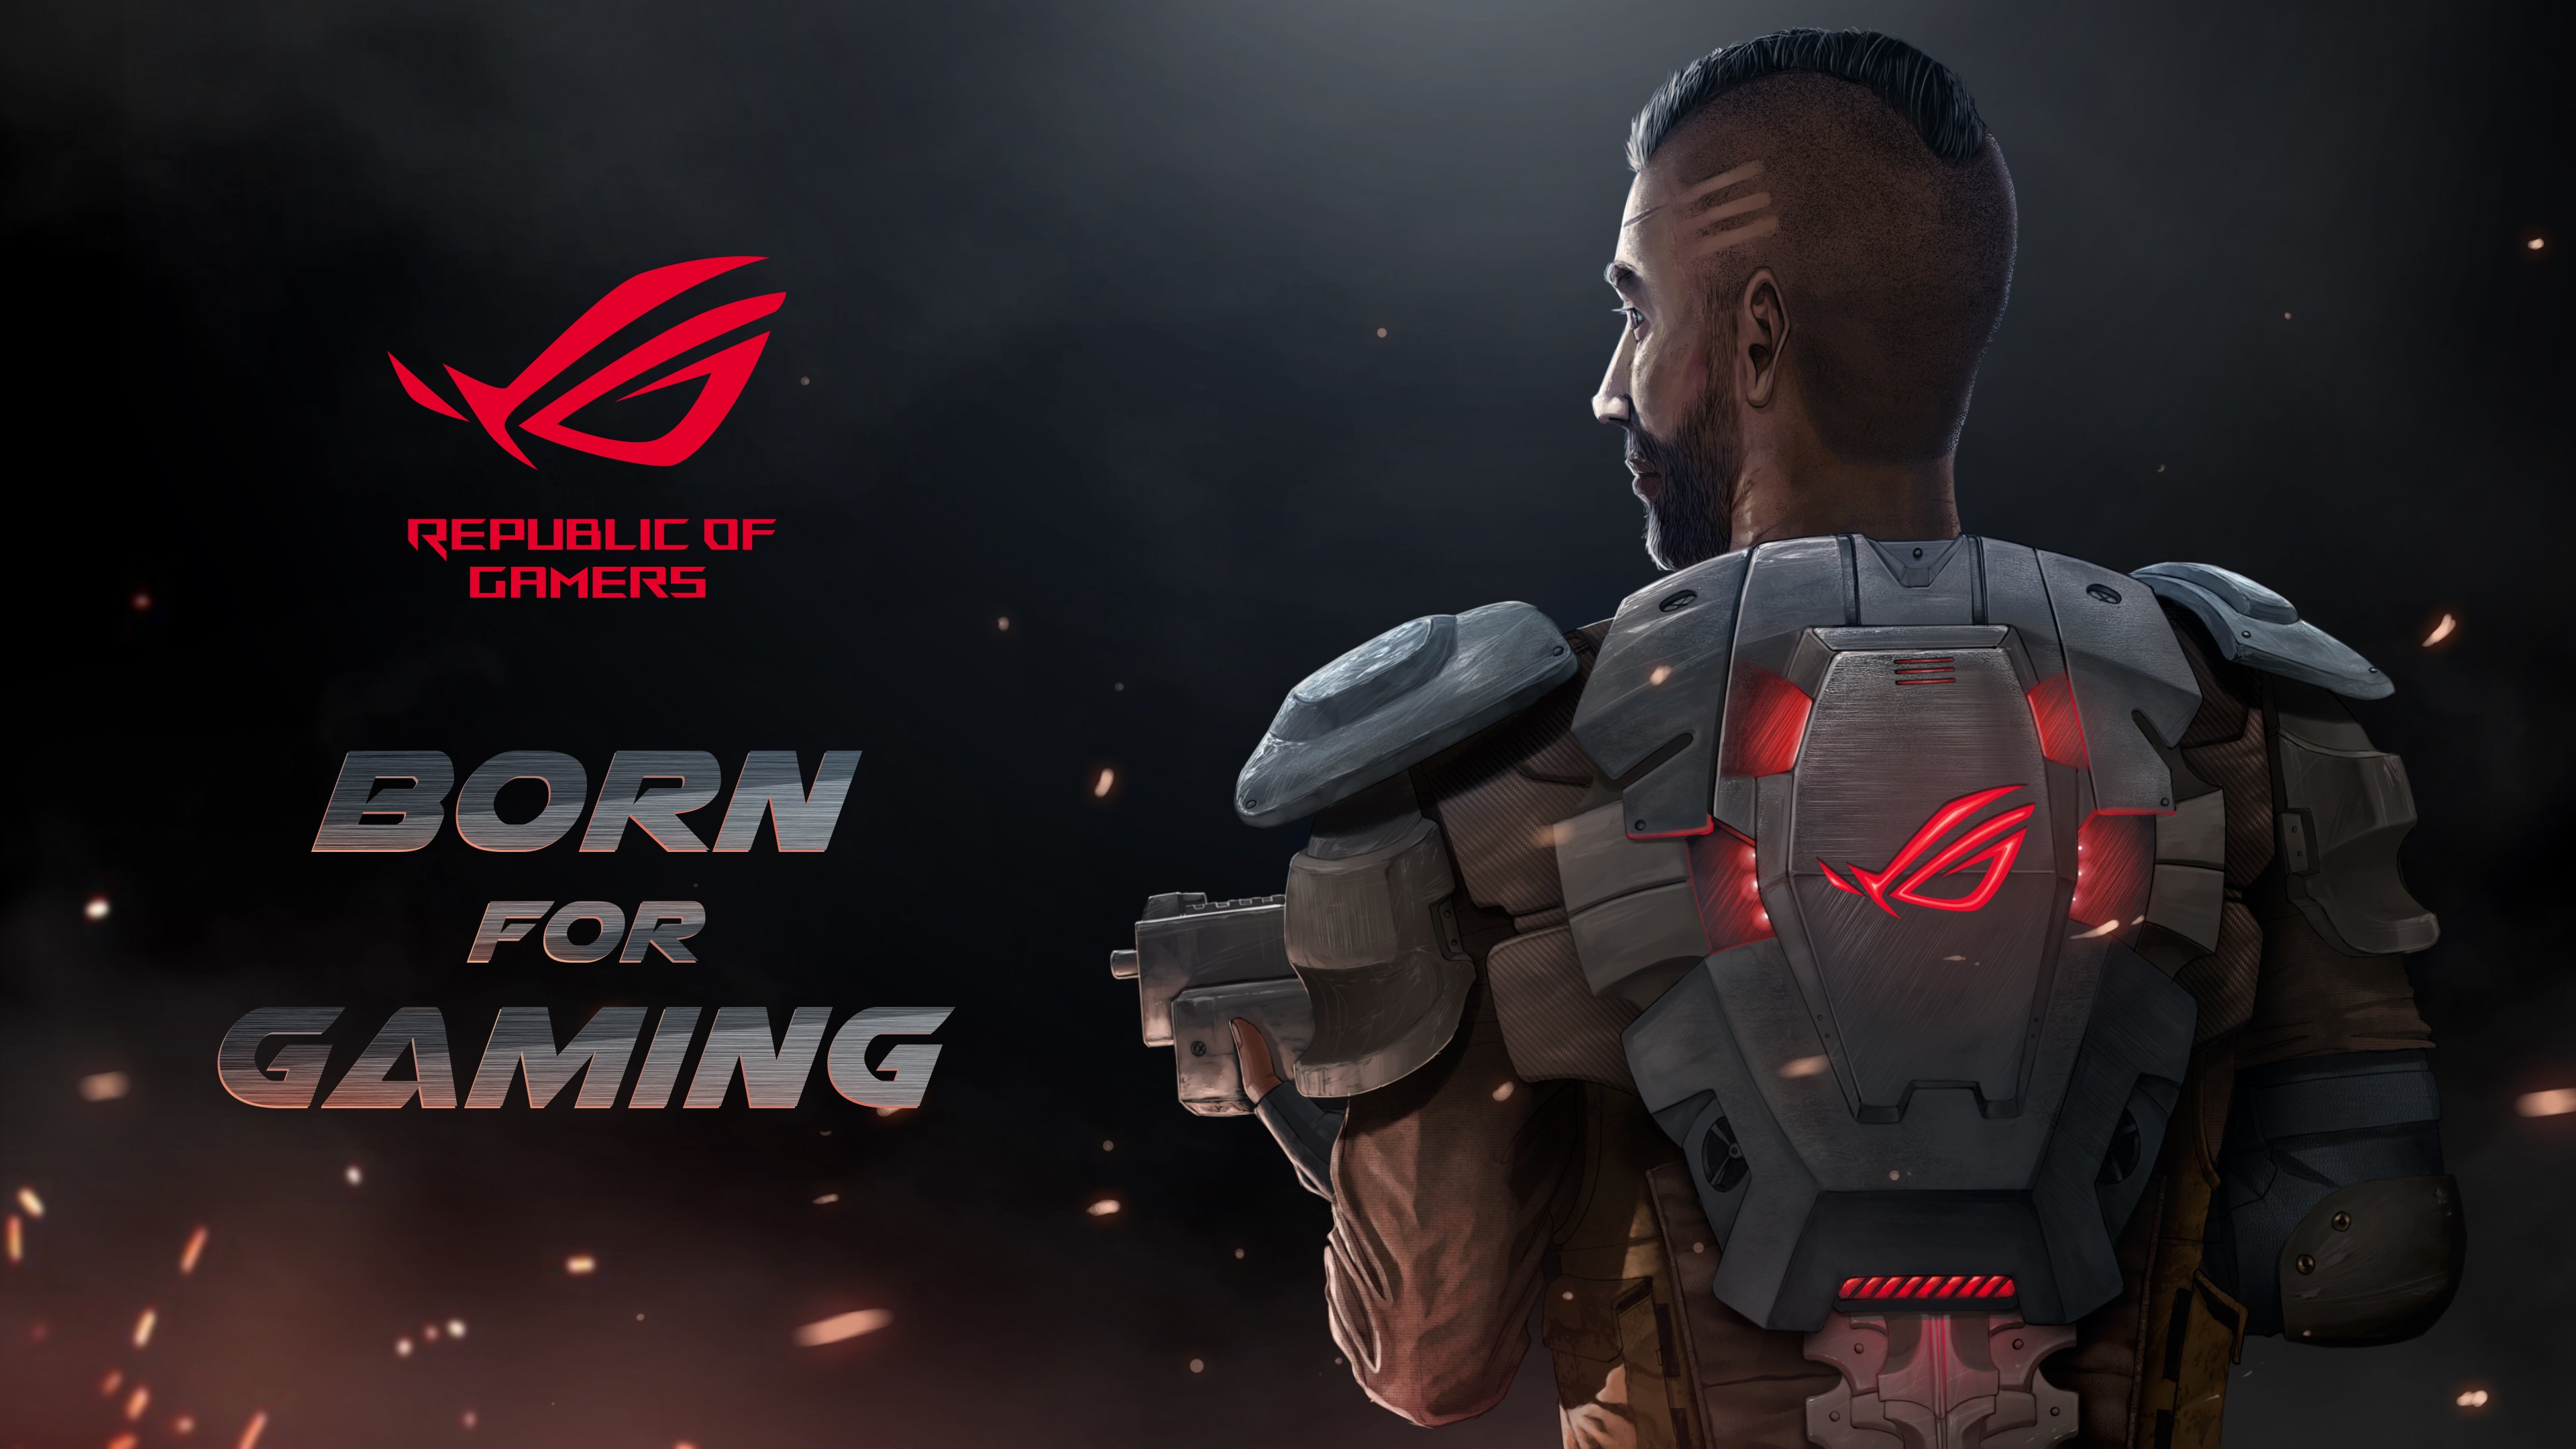 Kantawijayaarif on born for gaming wallpaper design for asus rog wallpaper challenge the character represent asus rog as were born for gaming the character inspired by asus rog itself since